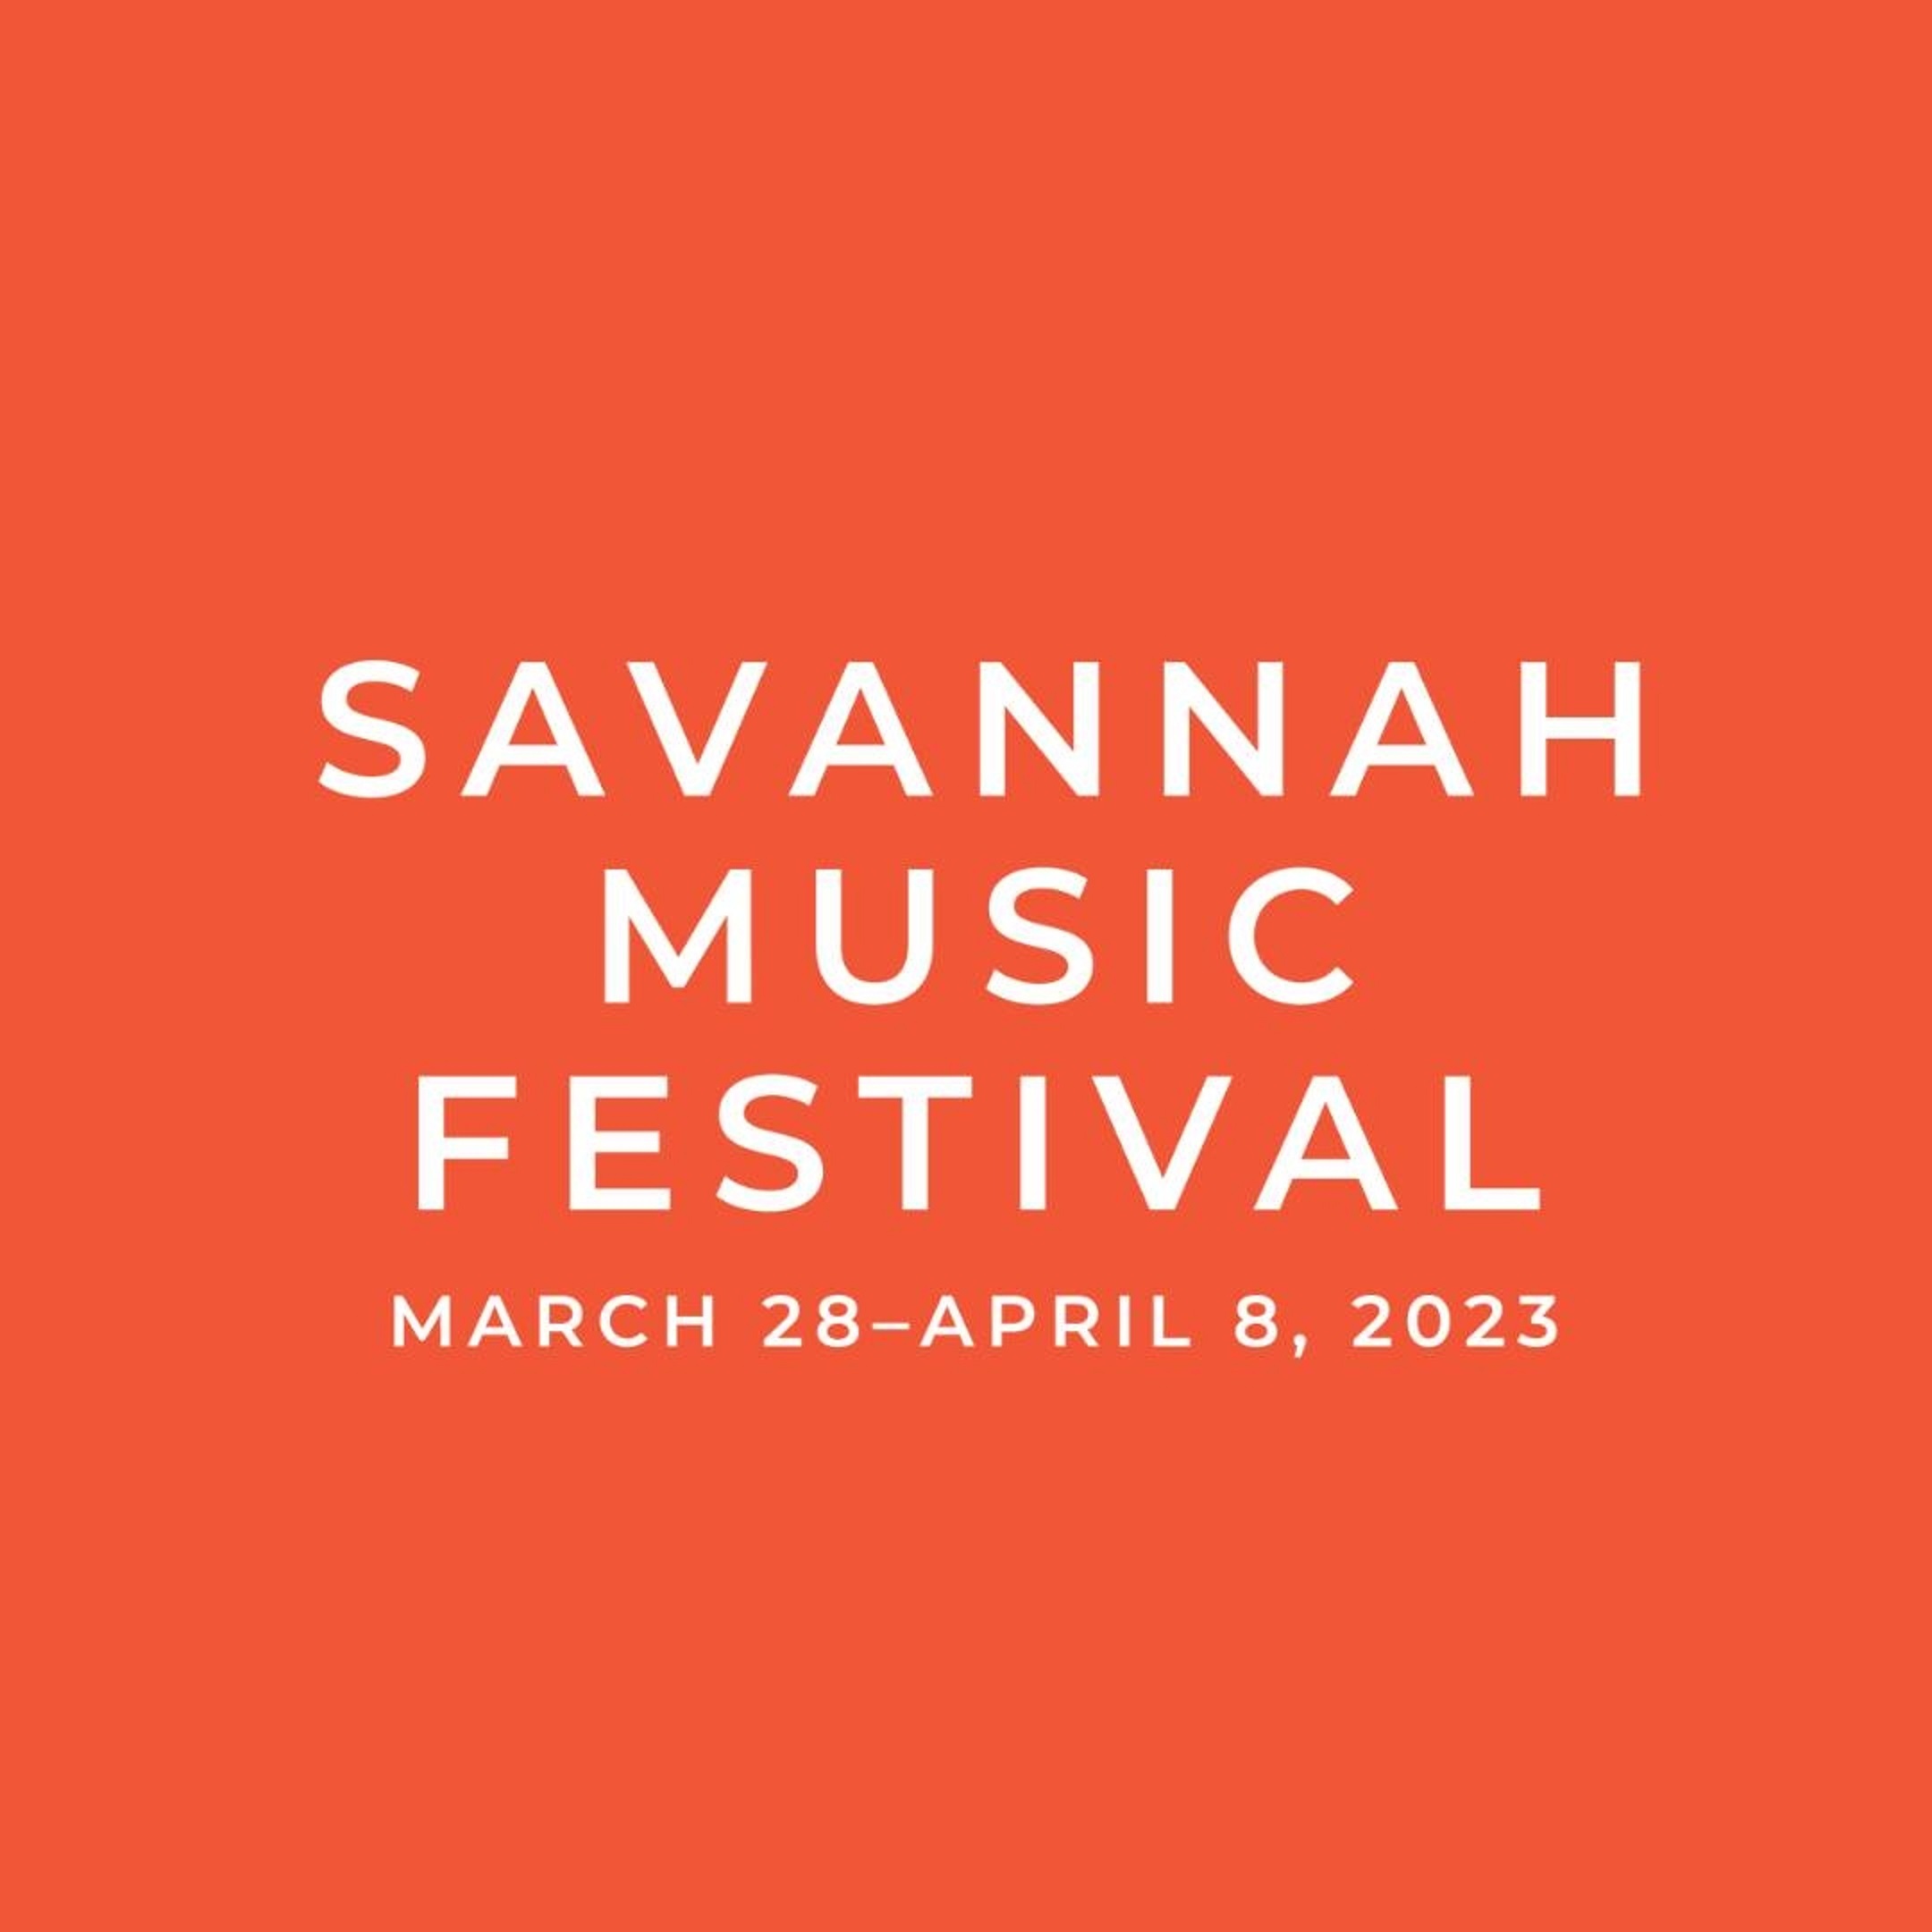 Savannah Music Festival Announces Unparalleled Lineup and Schedule for 2023, from March 23 - April 8